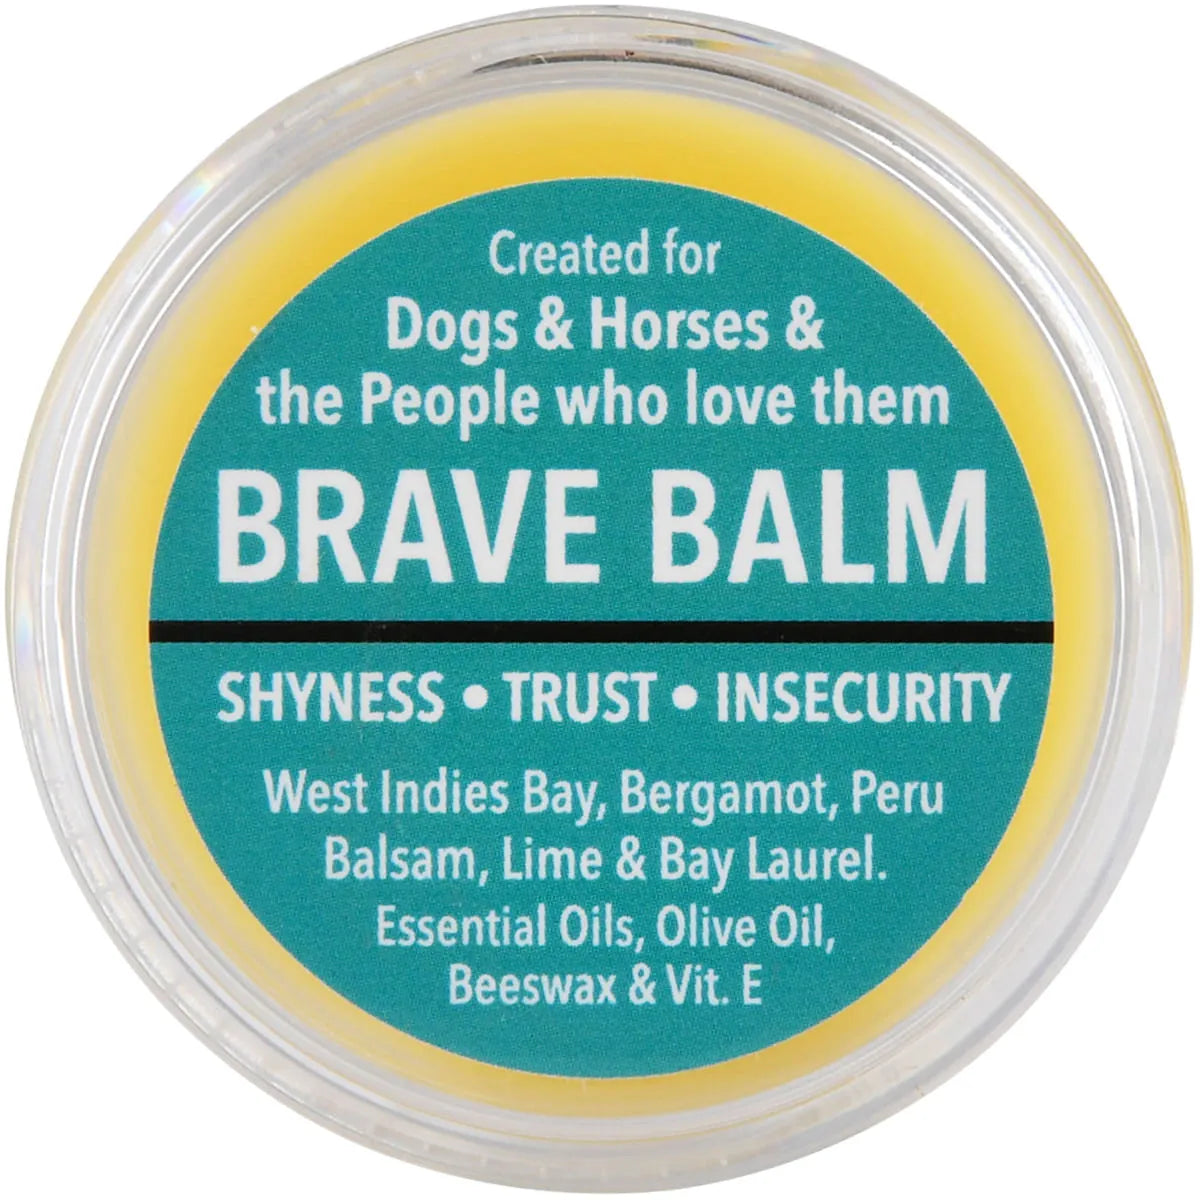 Blackwing Farms Brave Balm (15 ml balm) container lid